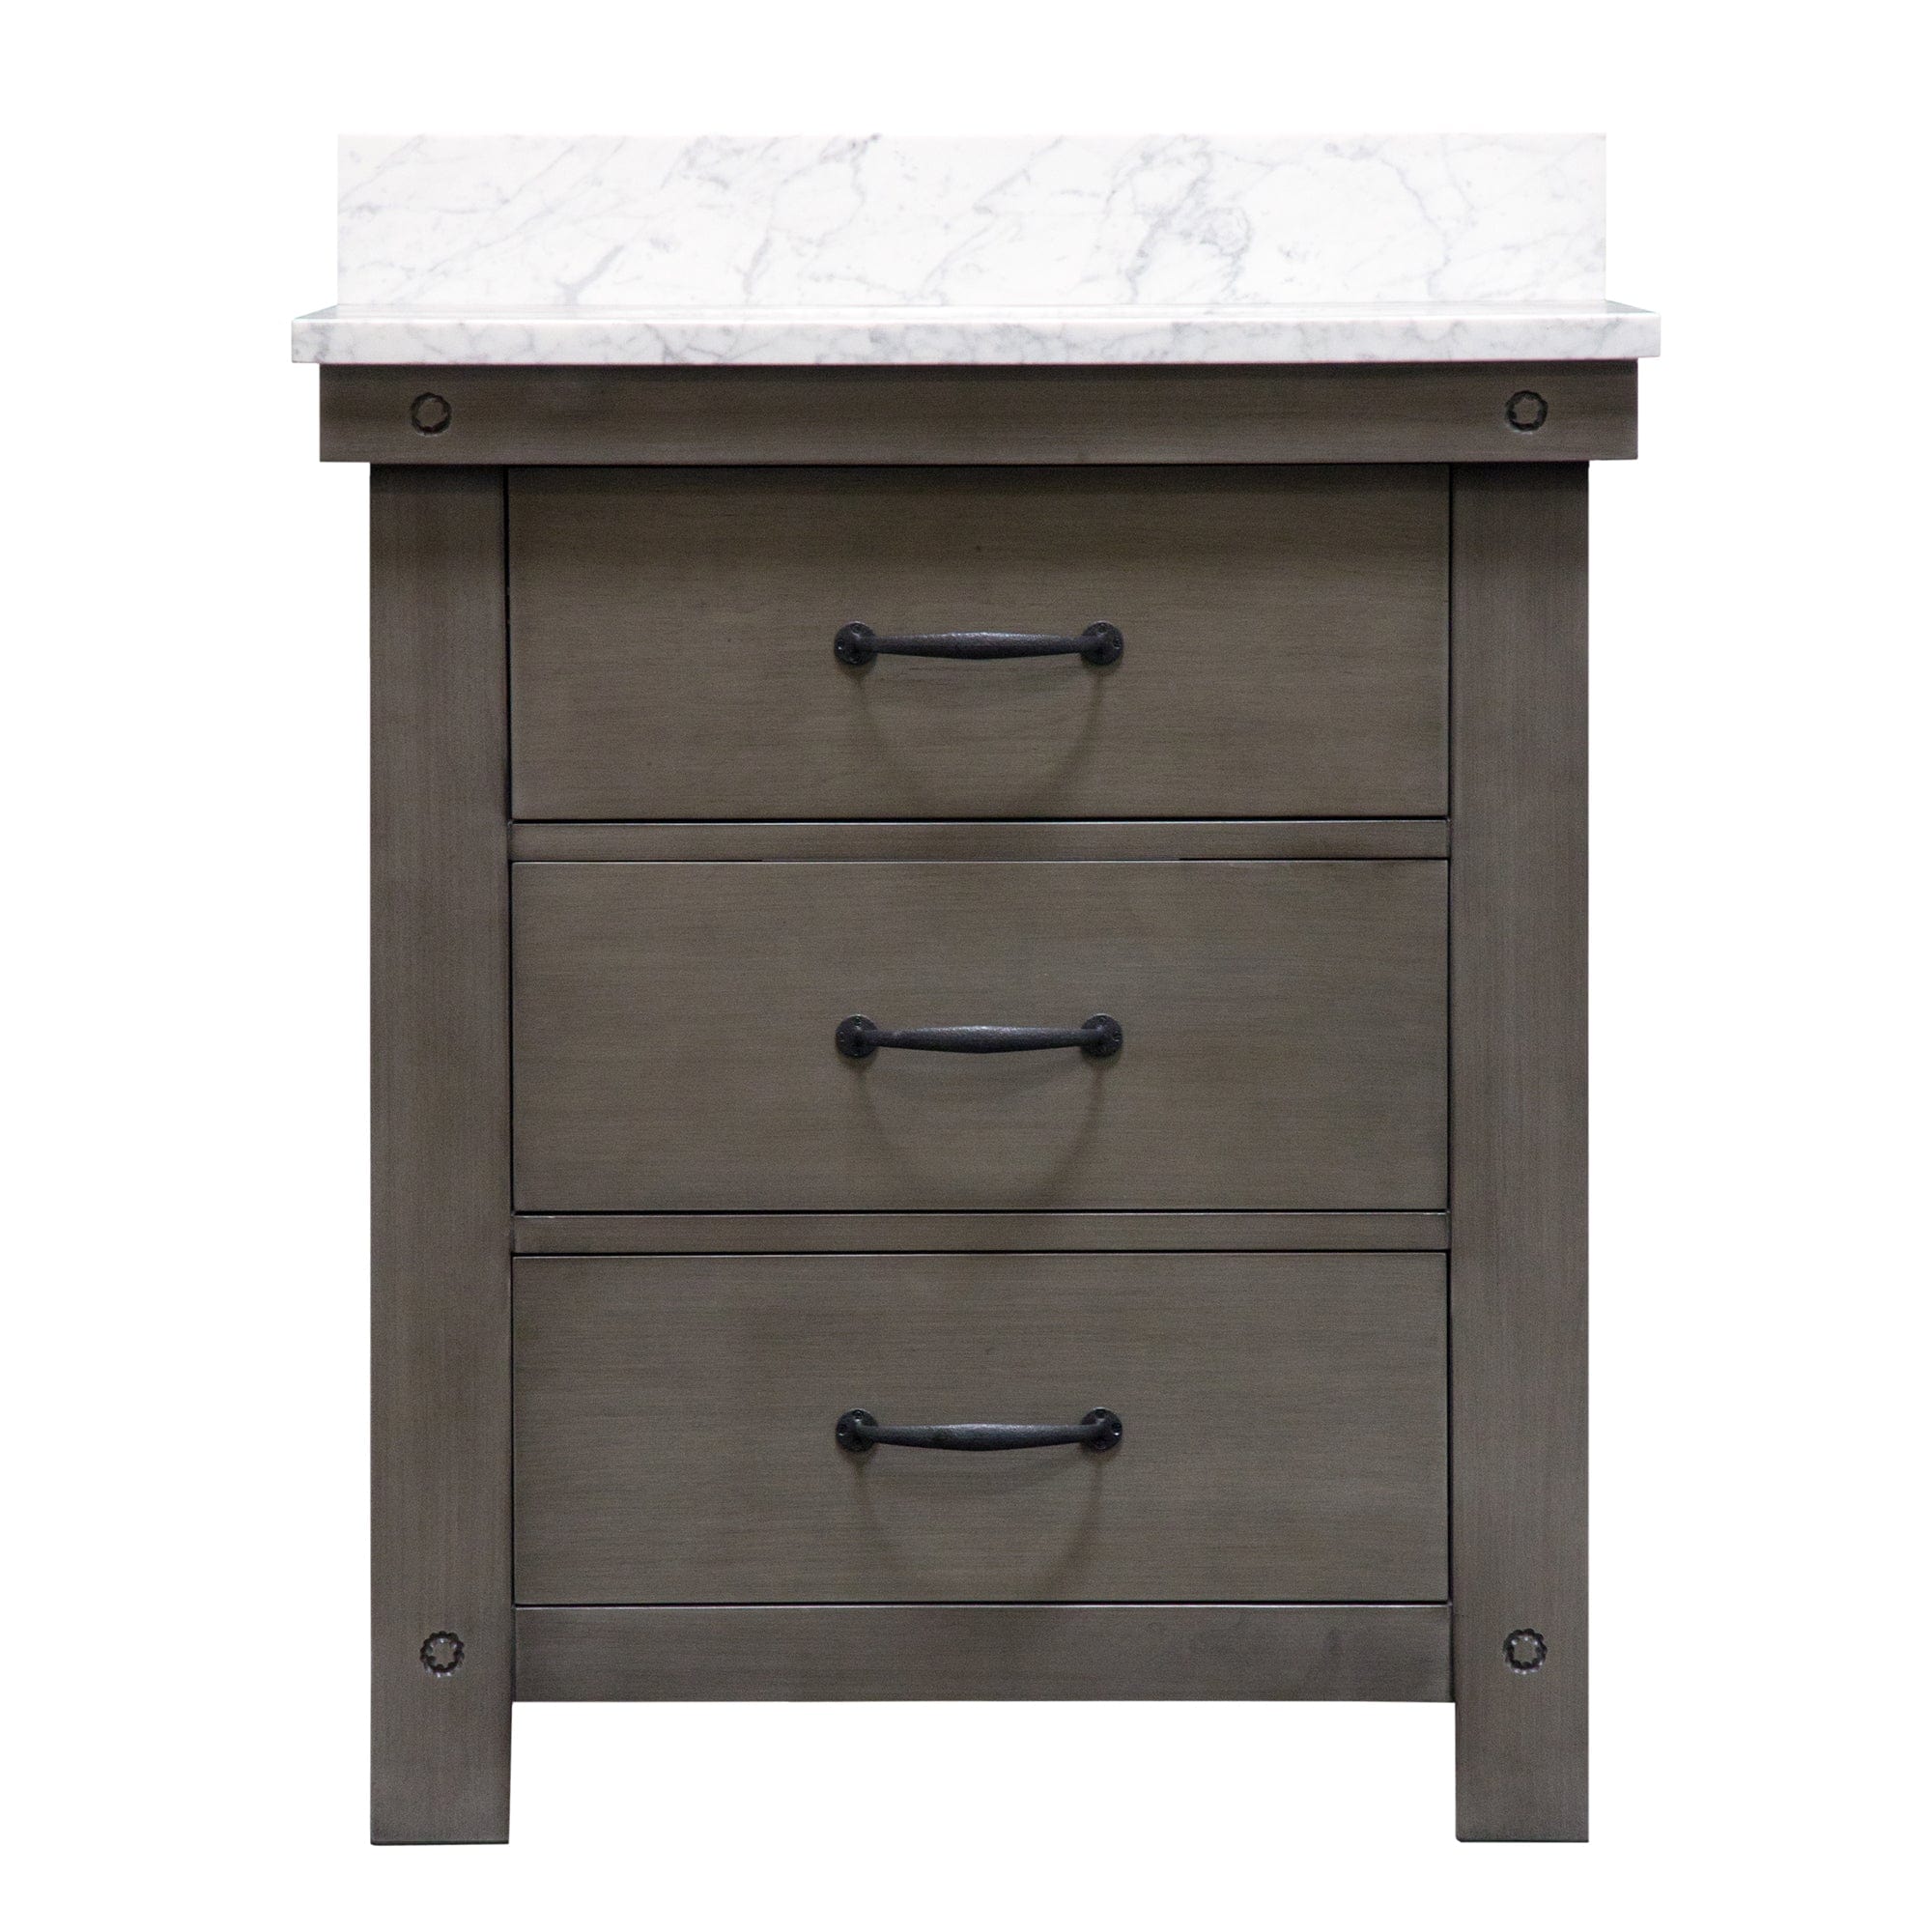 30 Inch Grizzle Grey Single Sink Bathroom Vanity With Faucet With Carrara White Marble Counter Top From The ABERDEEN Collection - Molaix732030749658Bathroom VanitiesAB30CW03GG-000BX1203